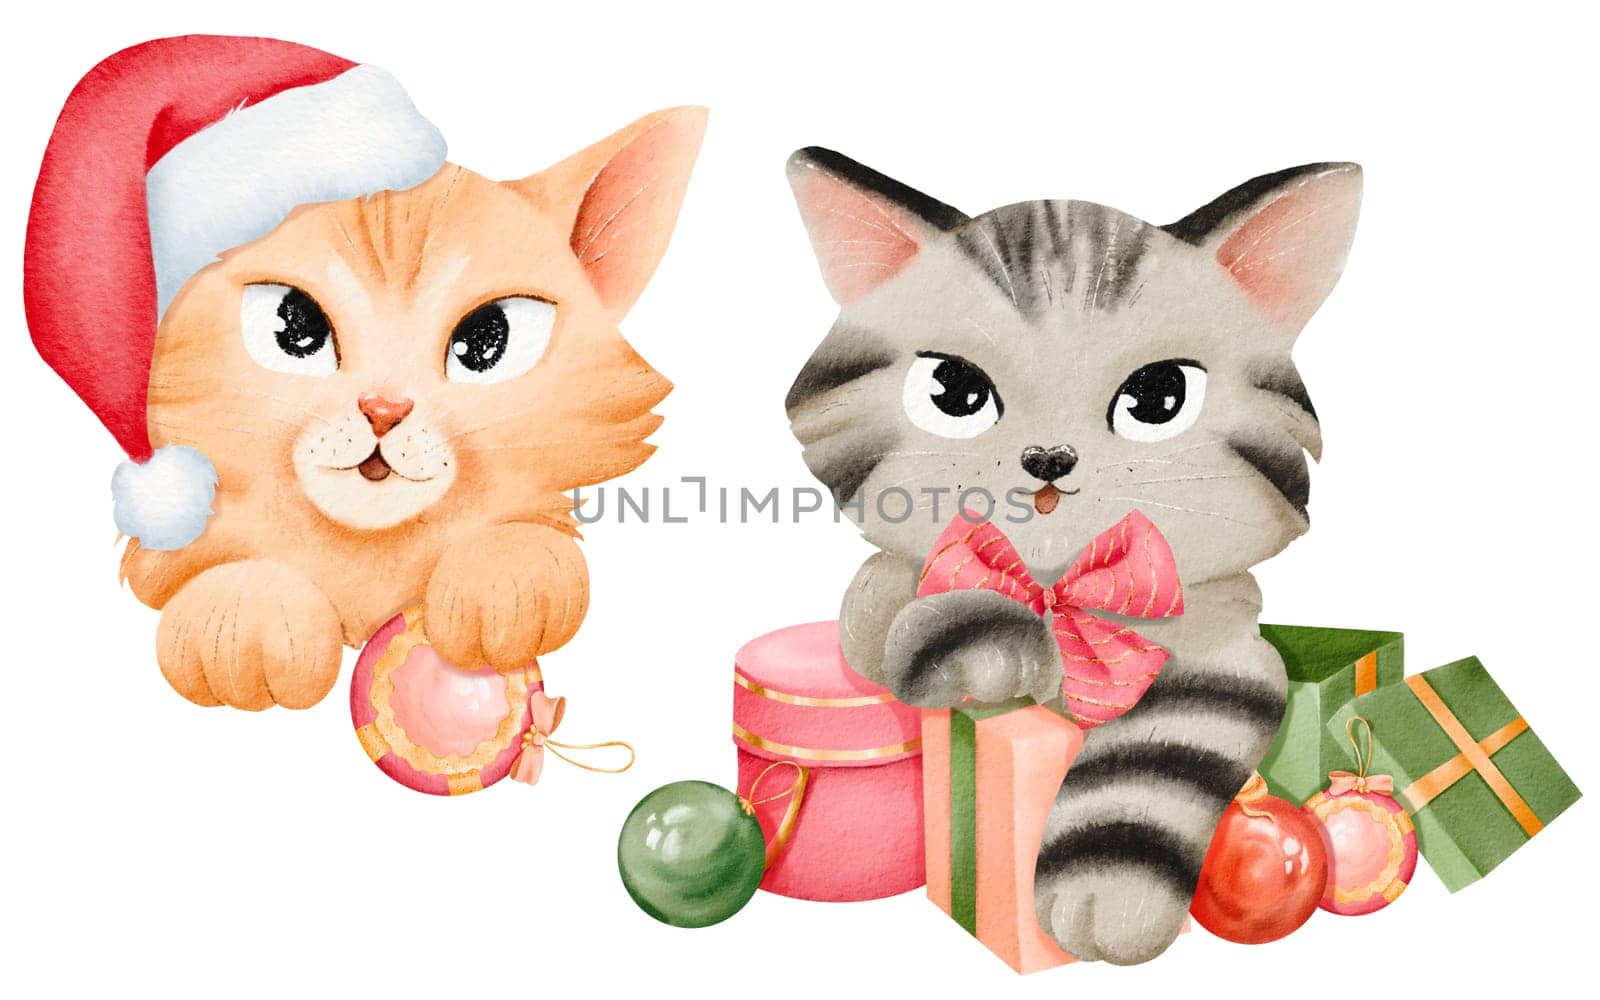 A set of adorable kittens in a festive mood. Santa hats, Christmas ornaments, and gifts. Cat portraits for stickers, cards, sets, design elements. Isolated watercolor digital illustrations.